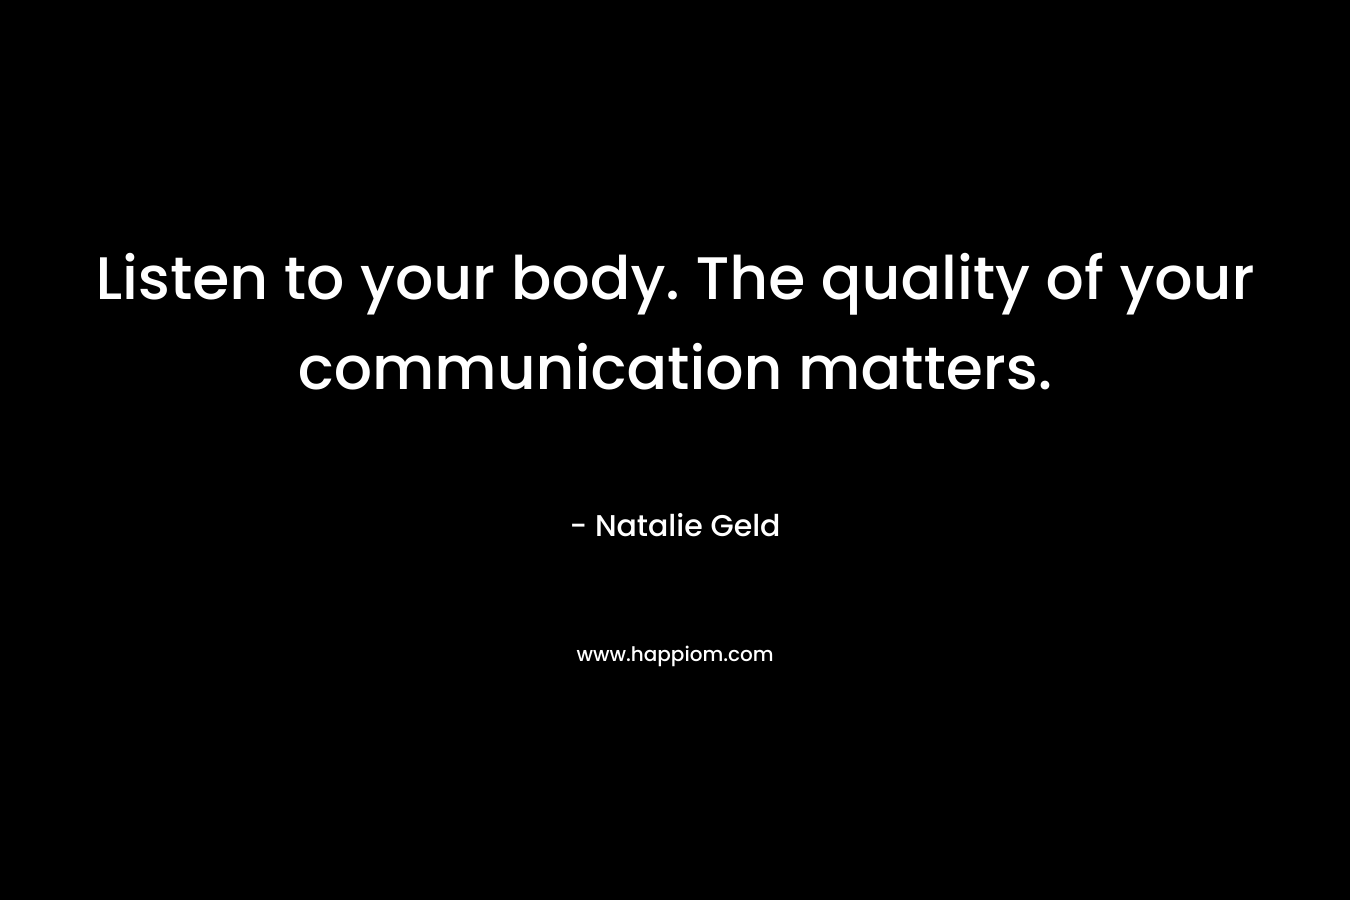 Listen to your body. The quality of your communication matters. – Natalie Geld